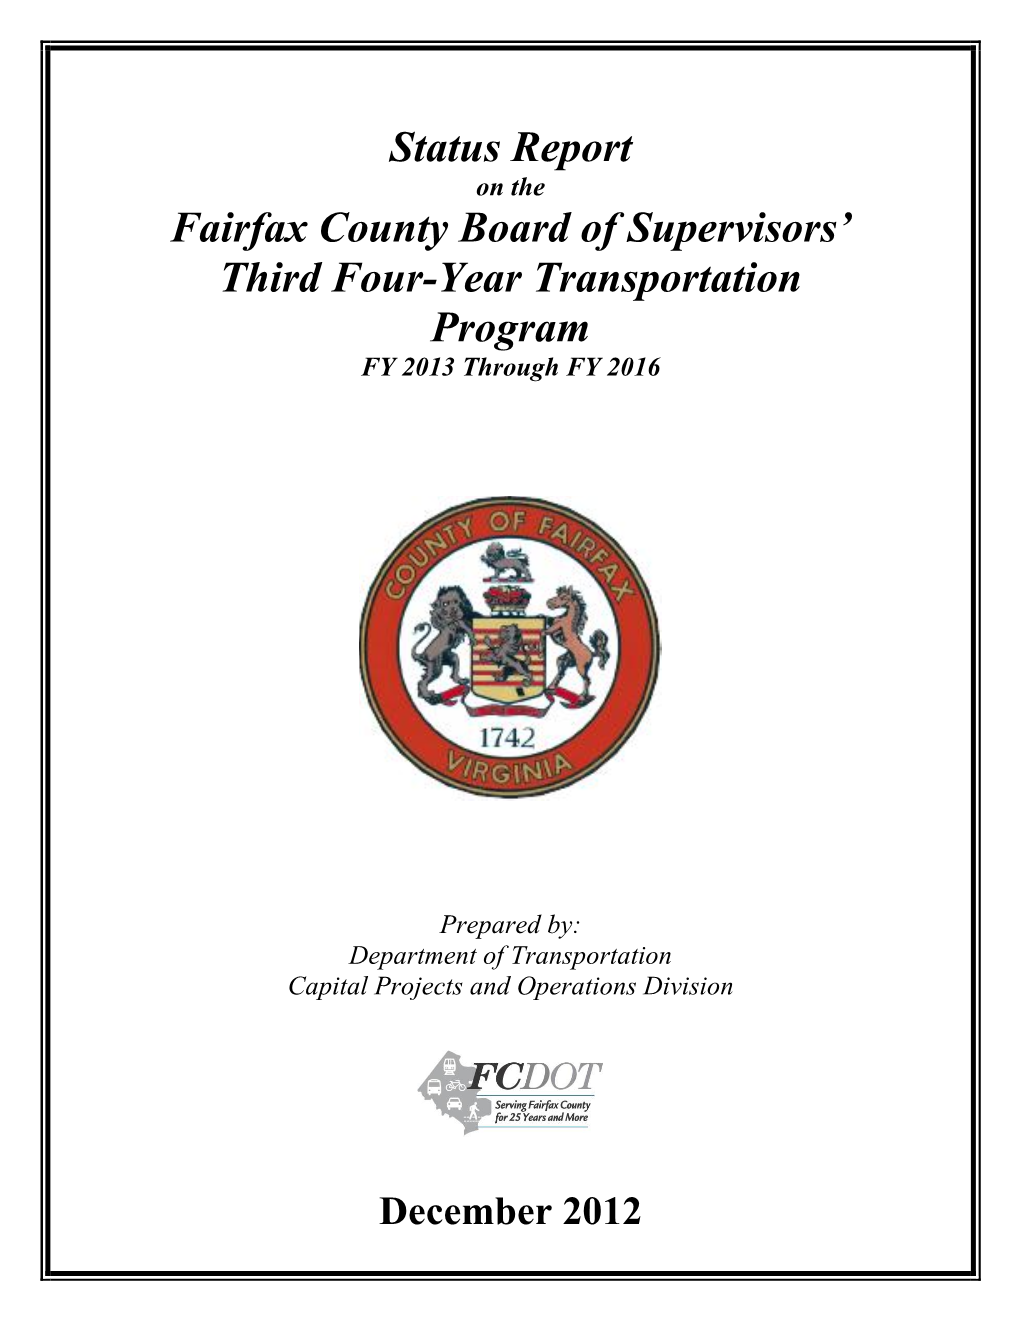 Fairfax County Board of Supervisors' Third Four-Year Transportation